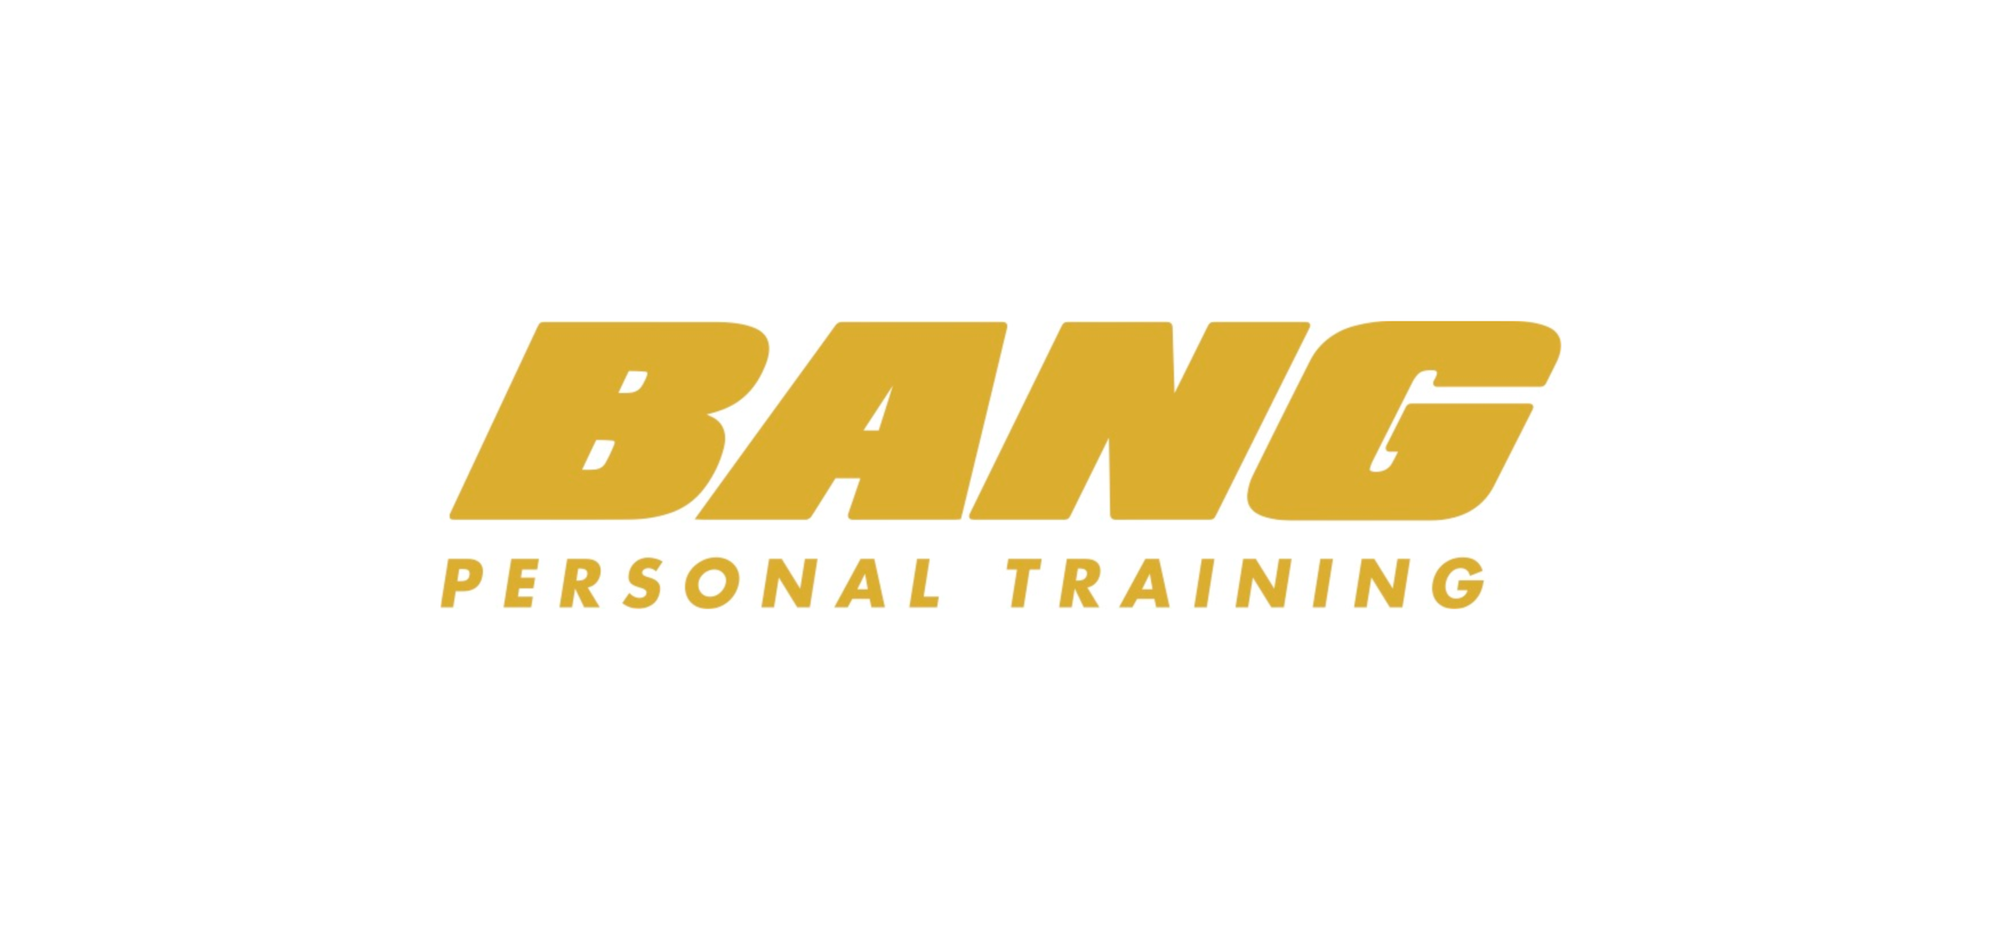 Train, Move and Live Well - Bang Personal Training